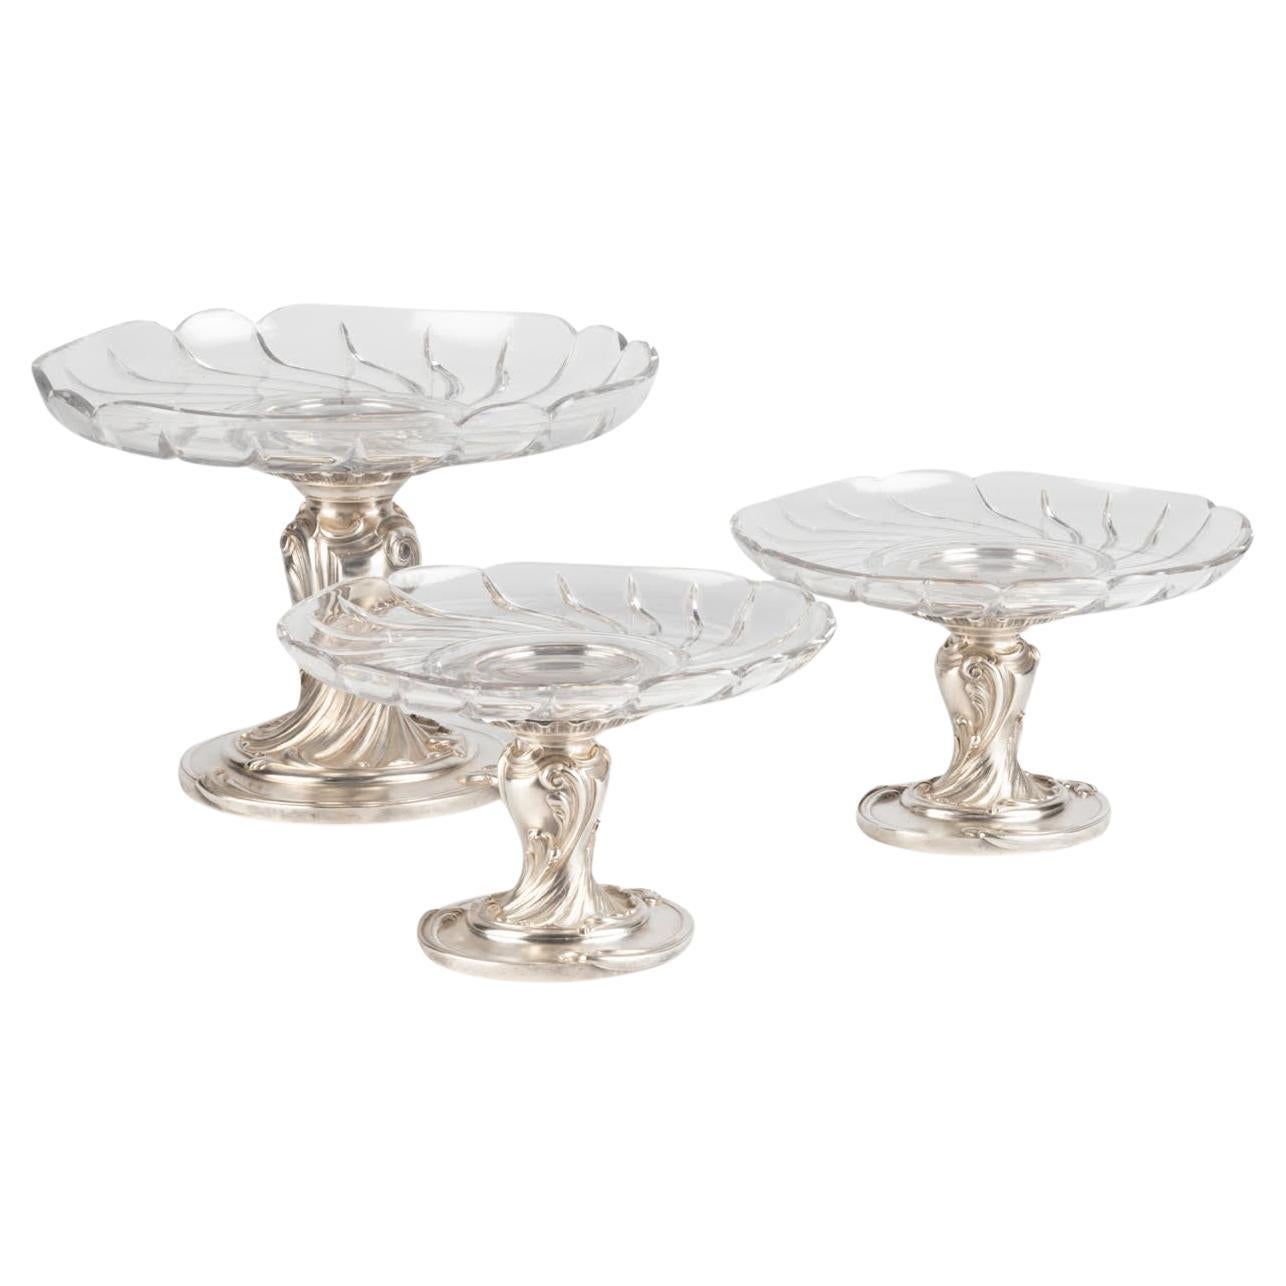 Set of Three Christofle Cake Stands, Napoleon III Period. For Sale